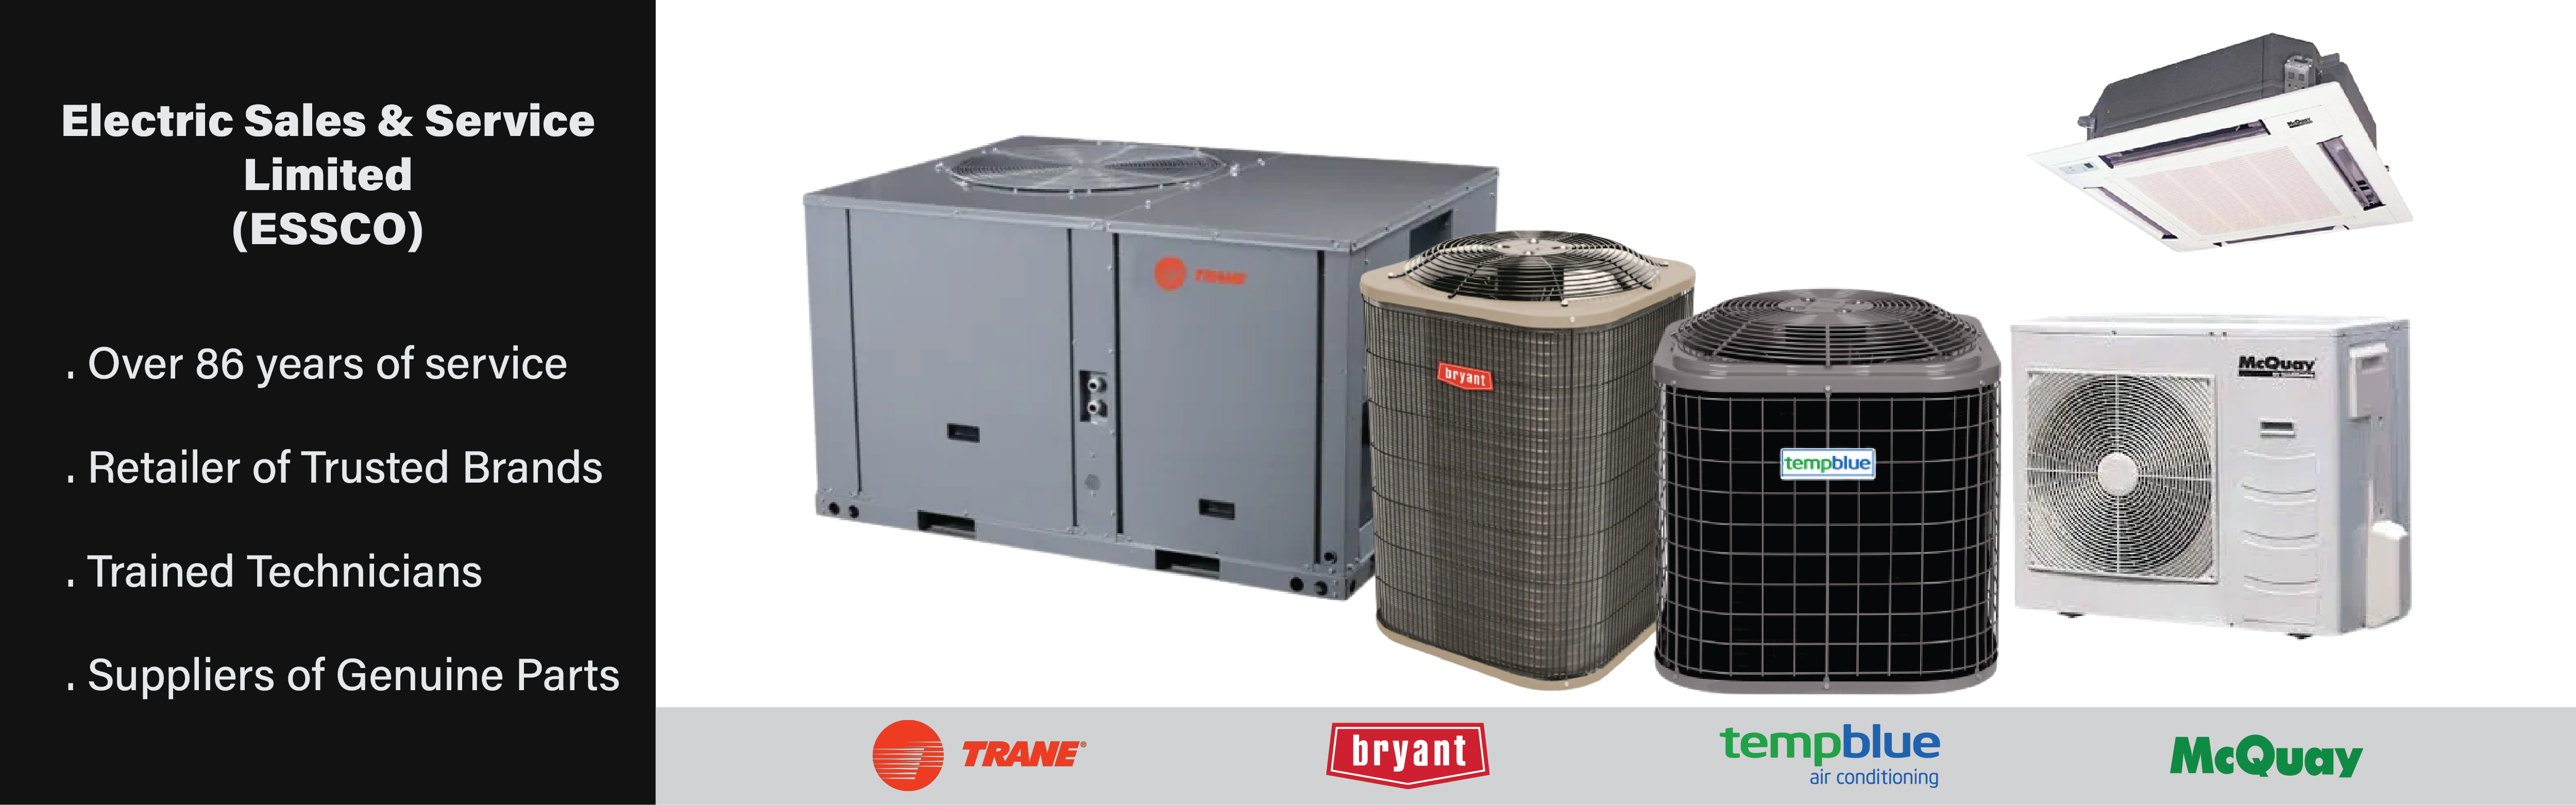 Image showcasing ESSCO's range of commercial air conditioning solutions